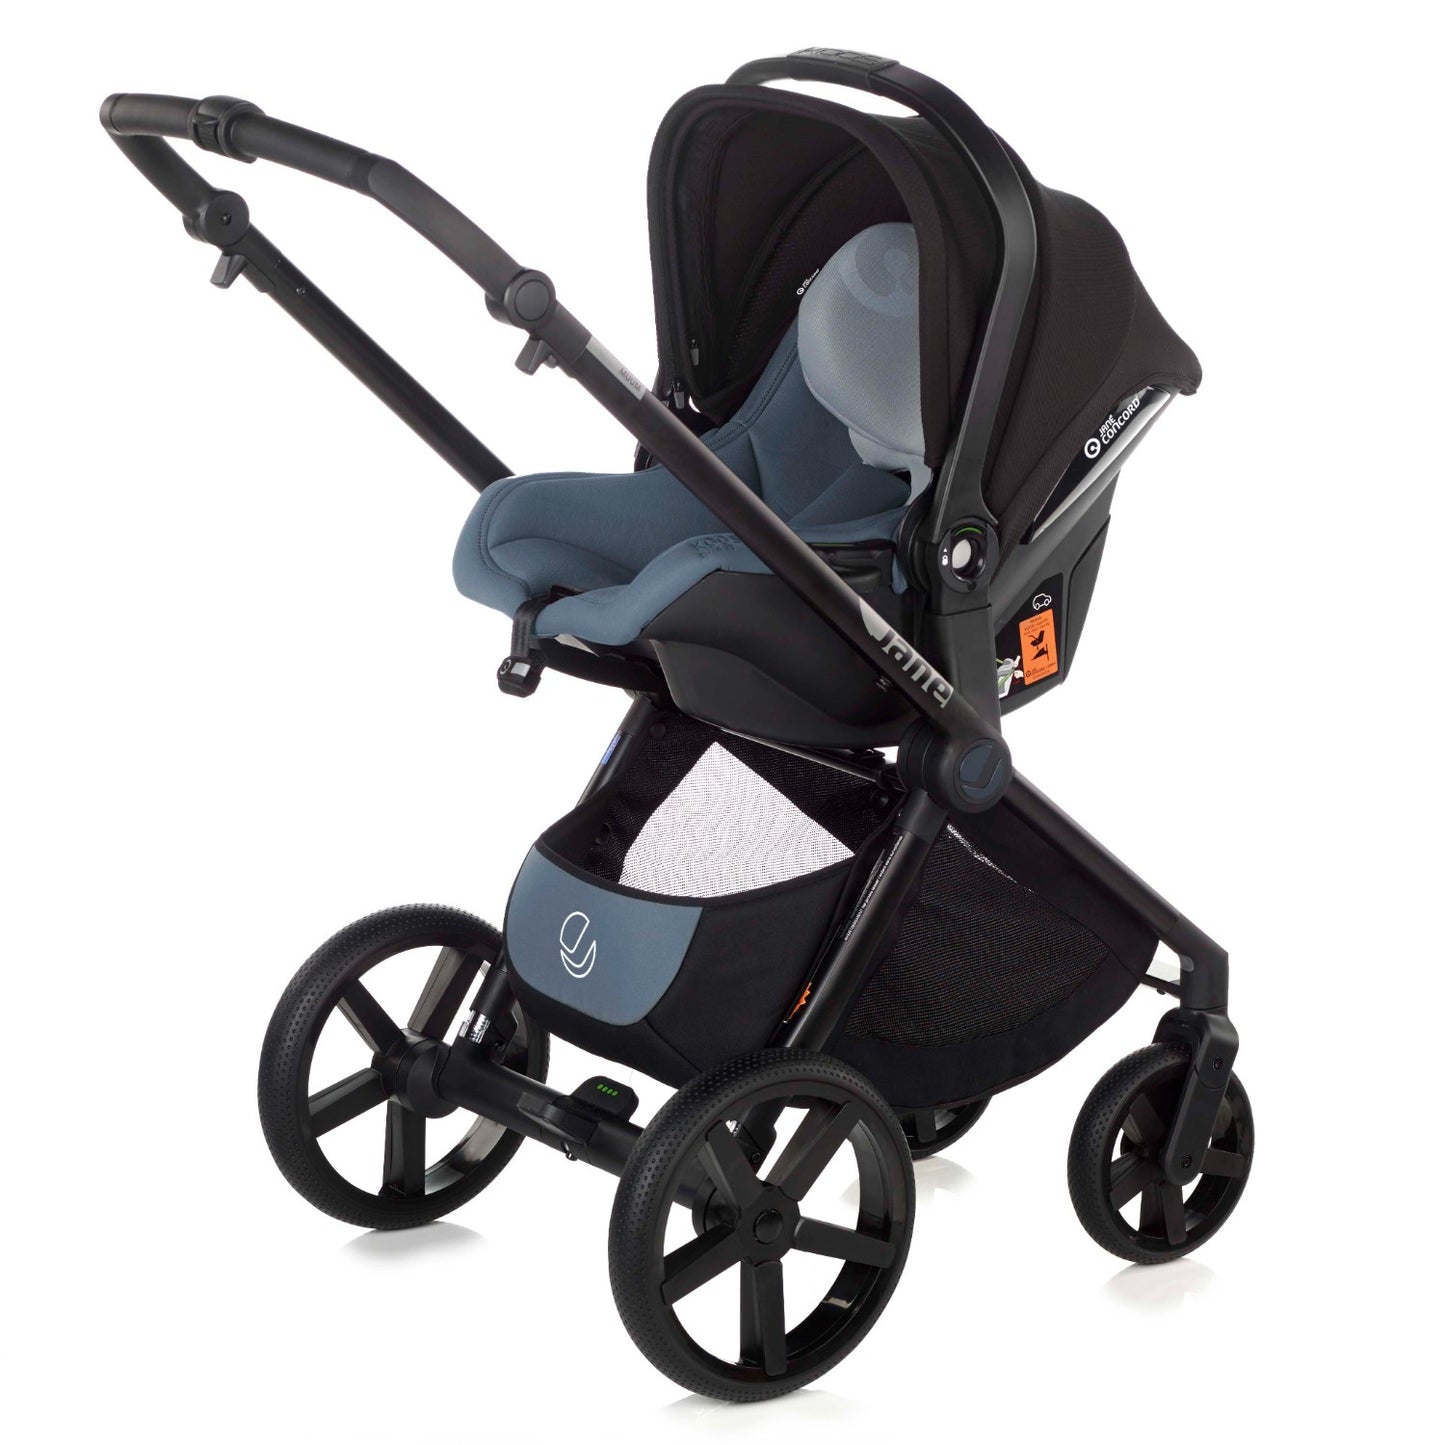 Jané Muum-4 + Sweet Carrycot + Koos iSize 3-in-1 Travel System